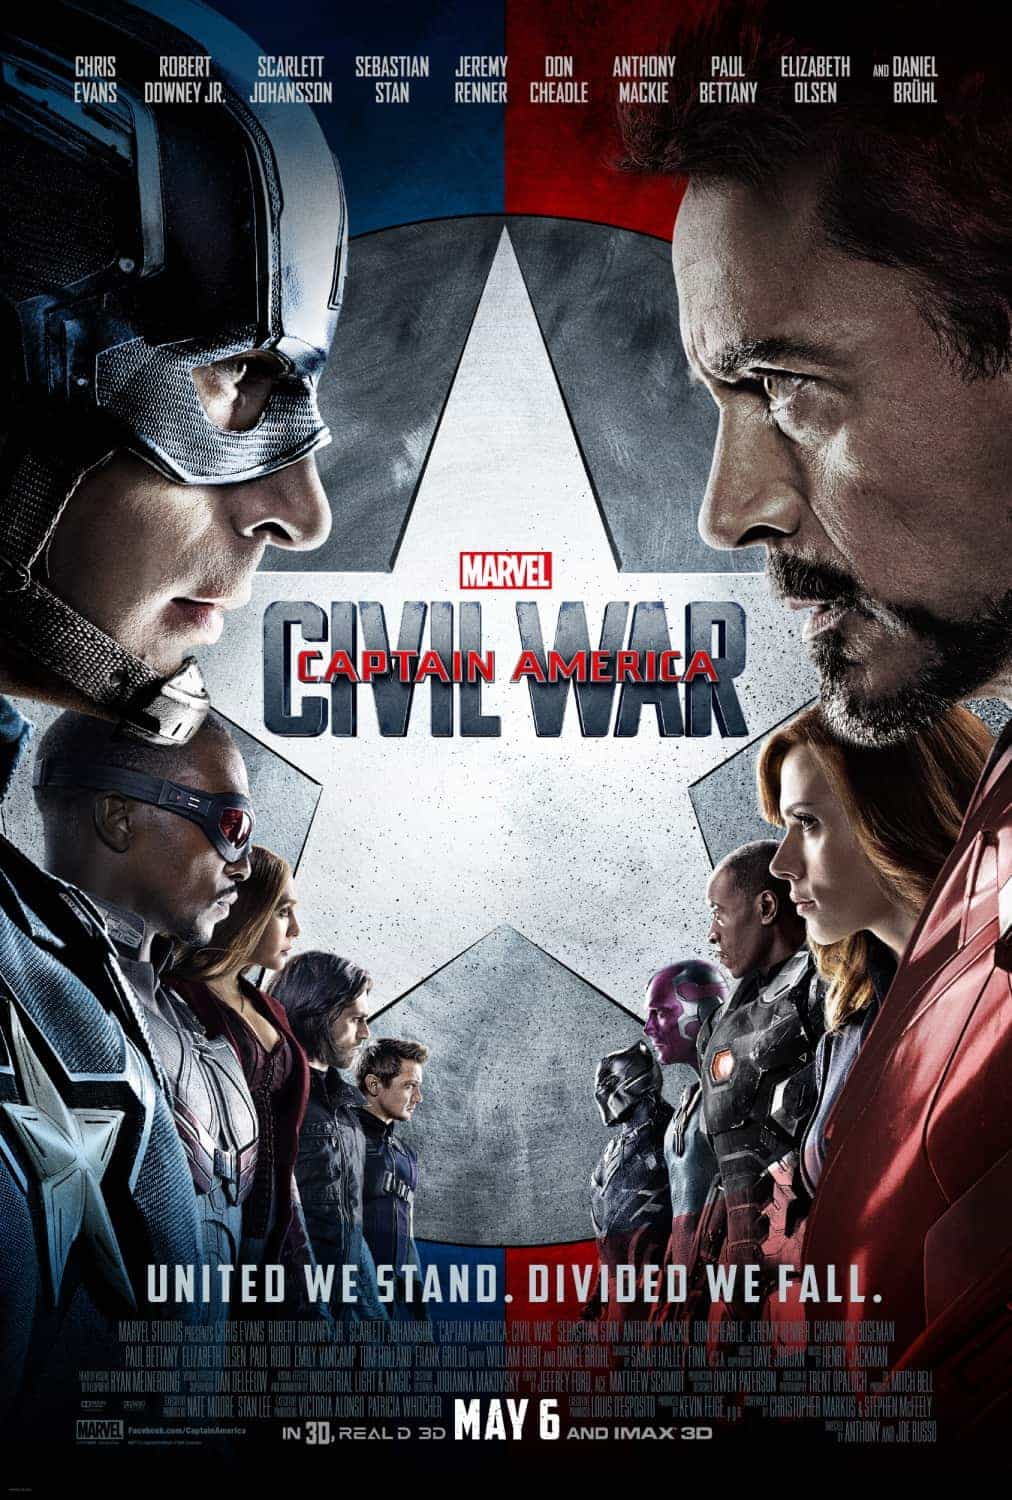 New trailer for Captain America Civil War - with a cameo from a certain web slinger